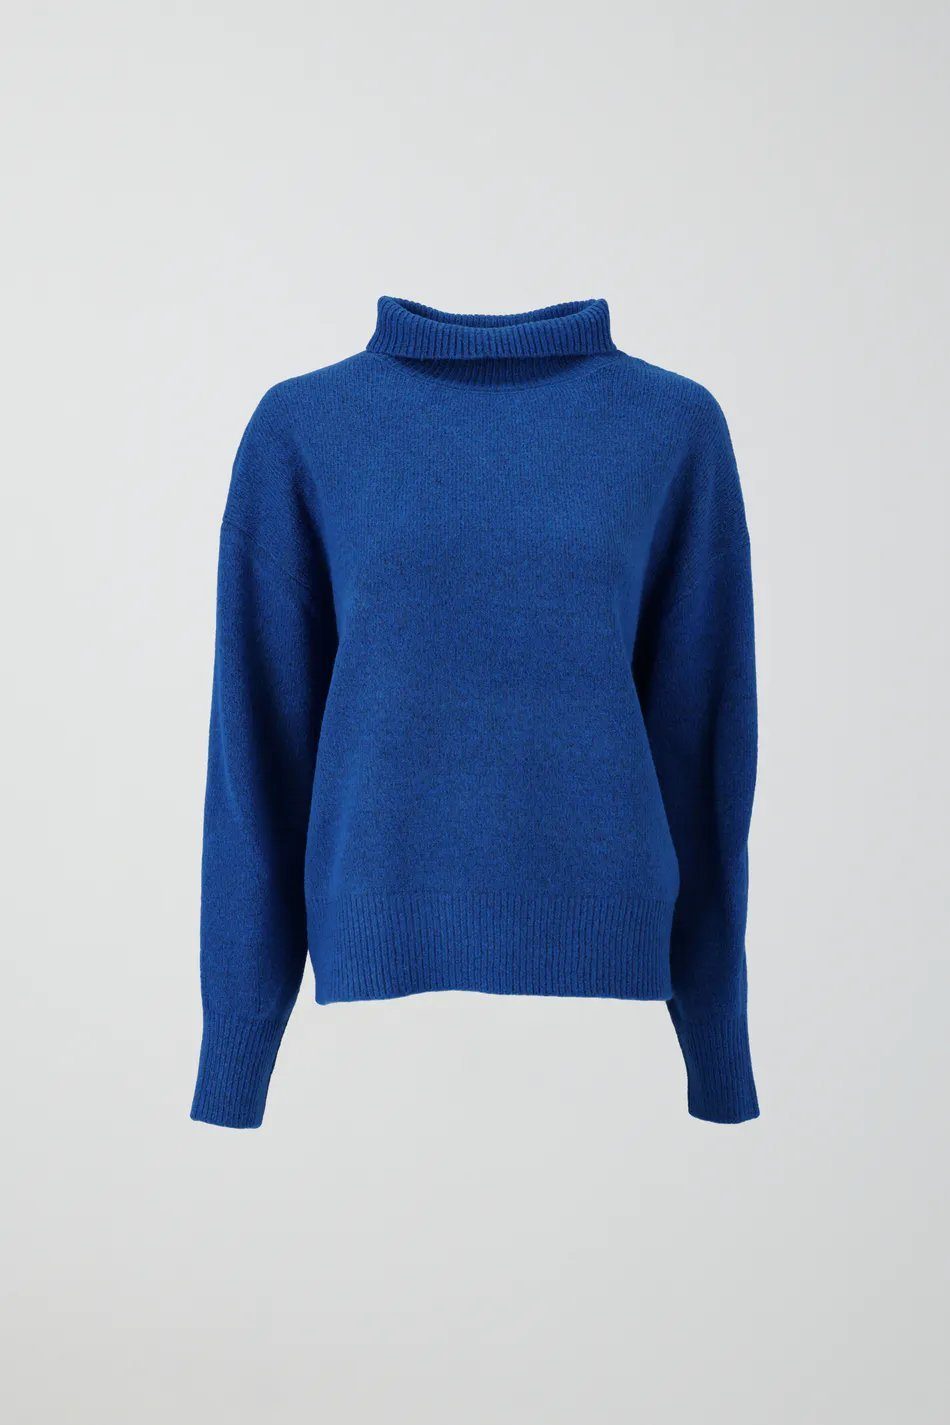 Gina Tricot Strickpullover Strong blue (5102)